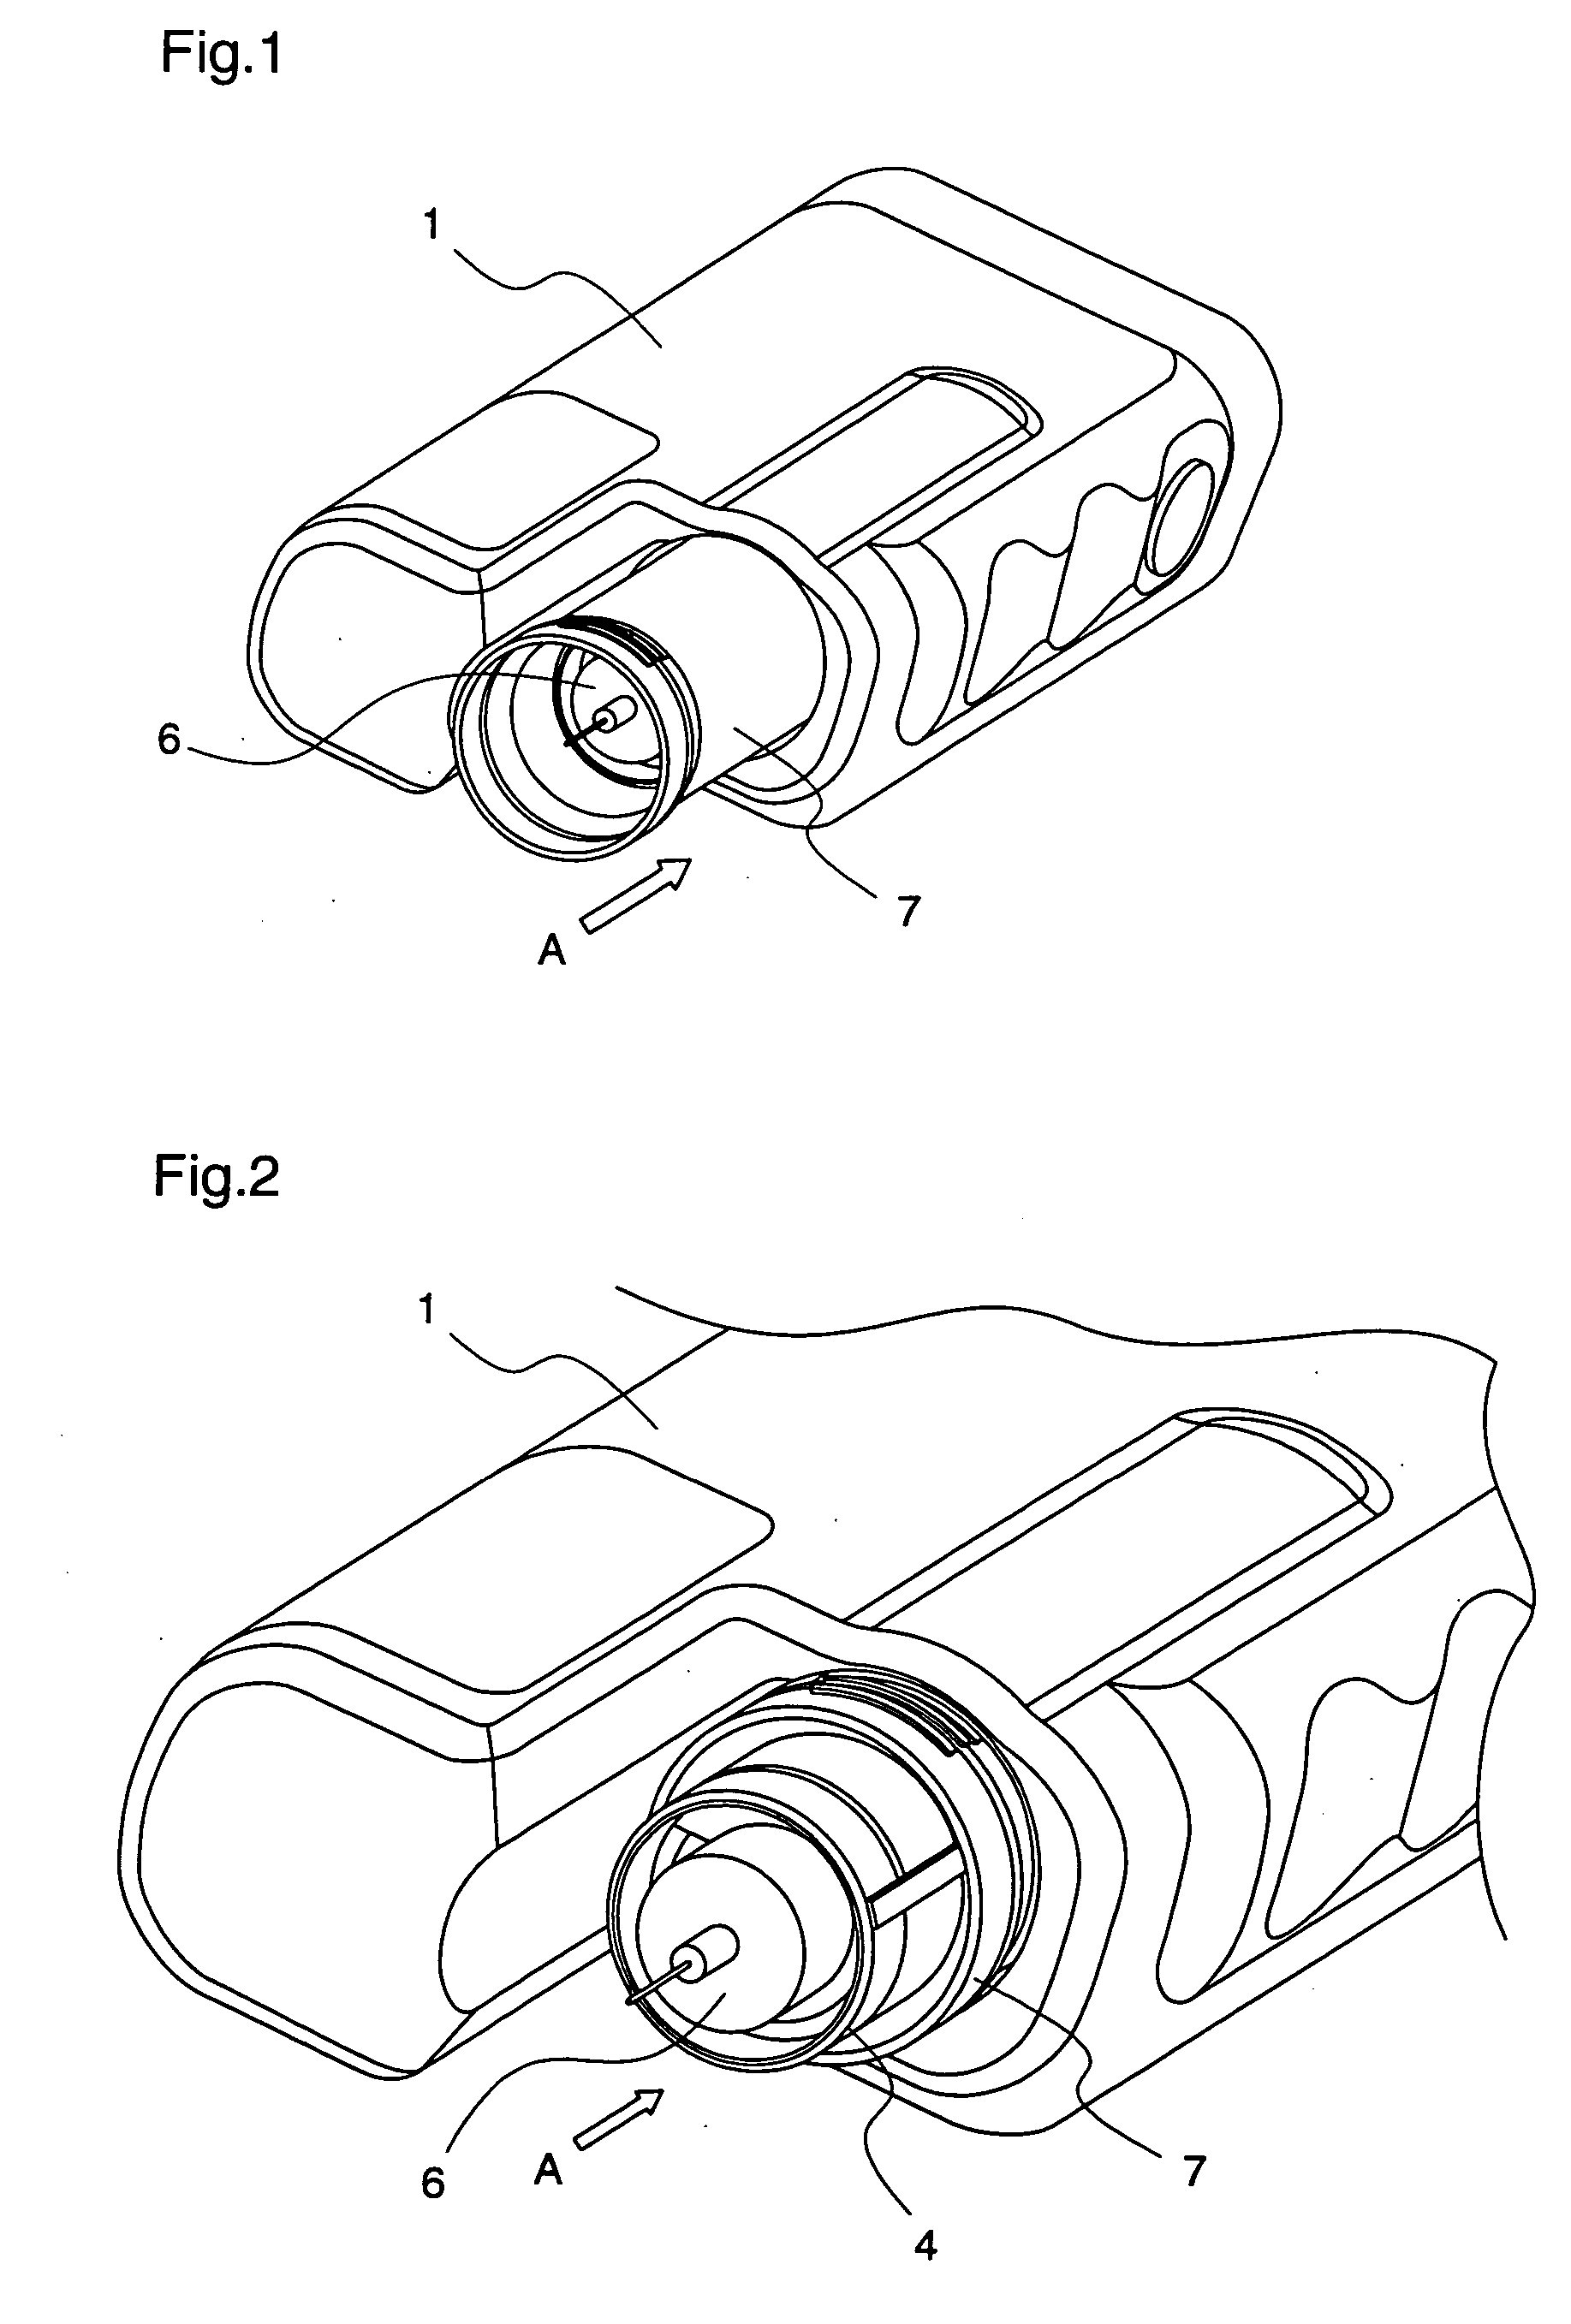 Administration apparatus for medical use